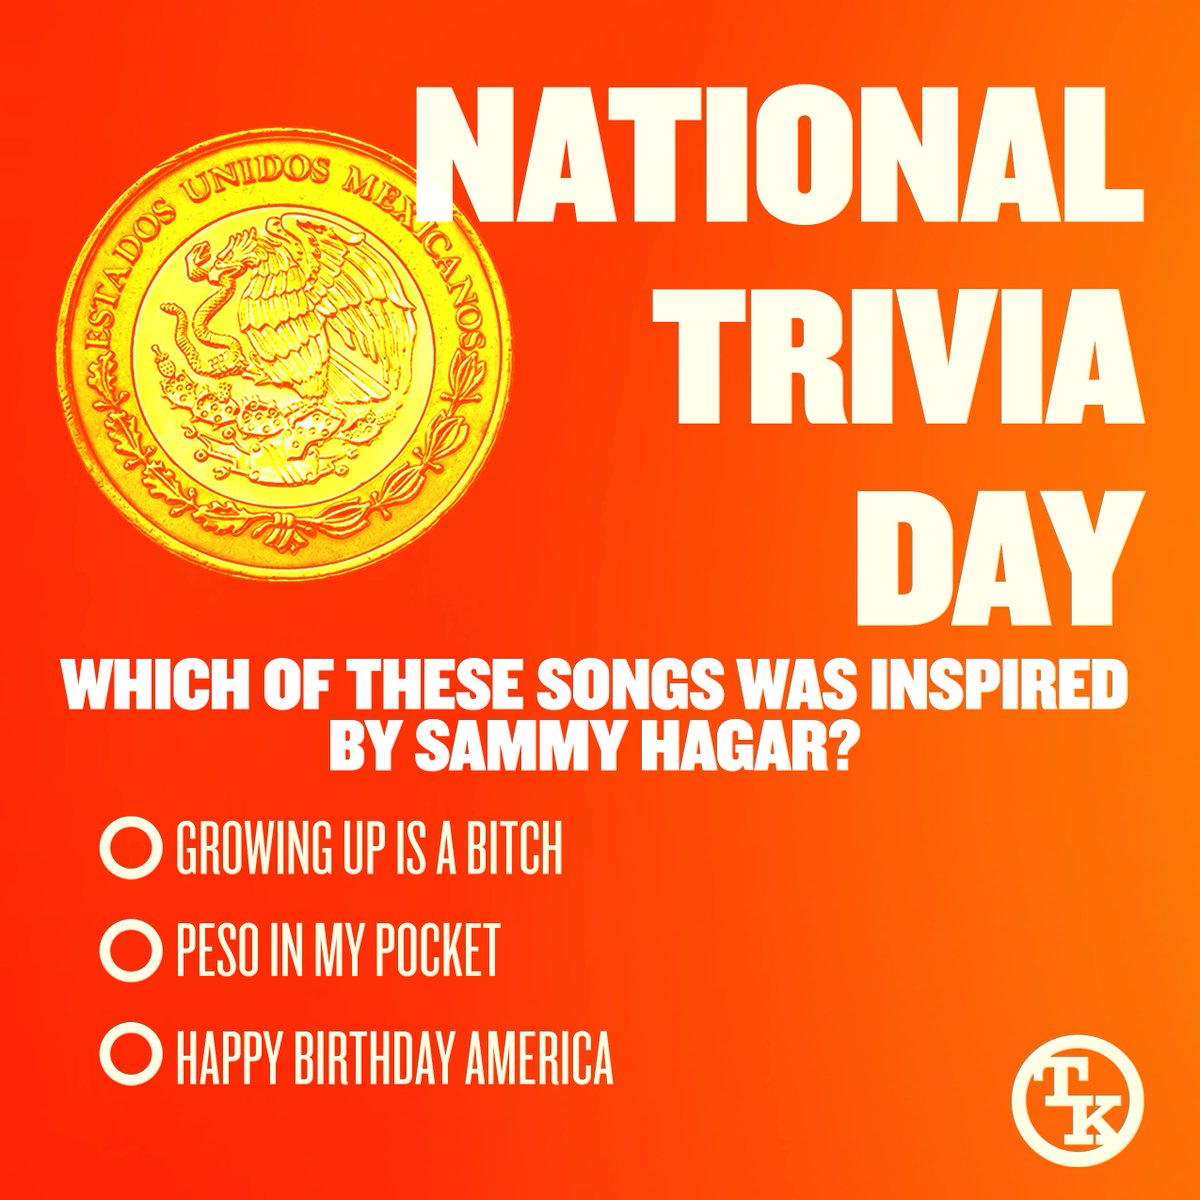 Test your #PesoInMyPocket knowledge for #NationalTriviaDay...and then go turn it up! orcd.co/pesoinmypocket